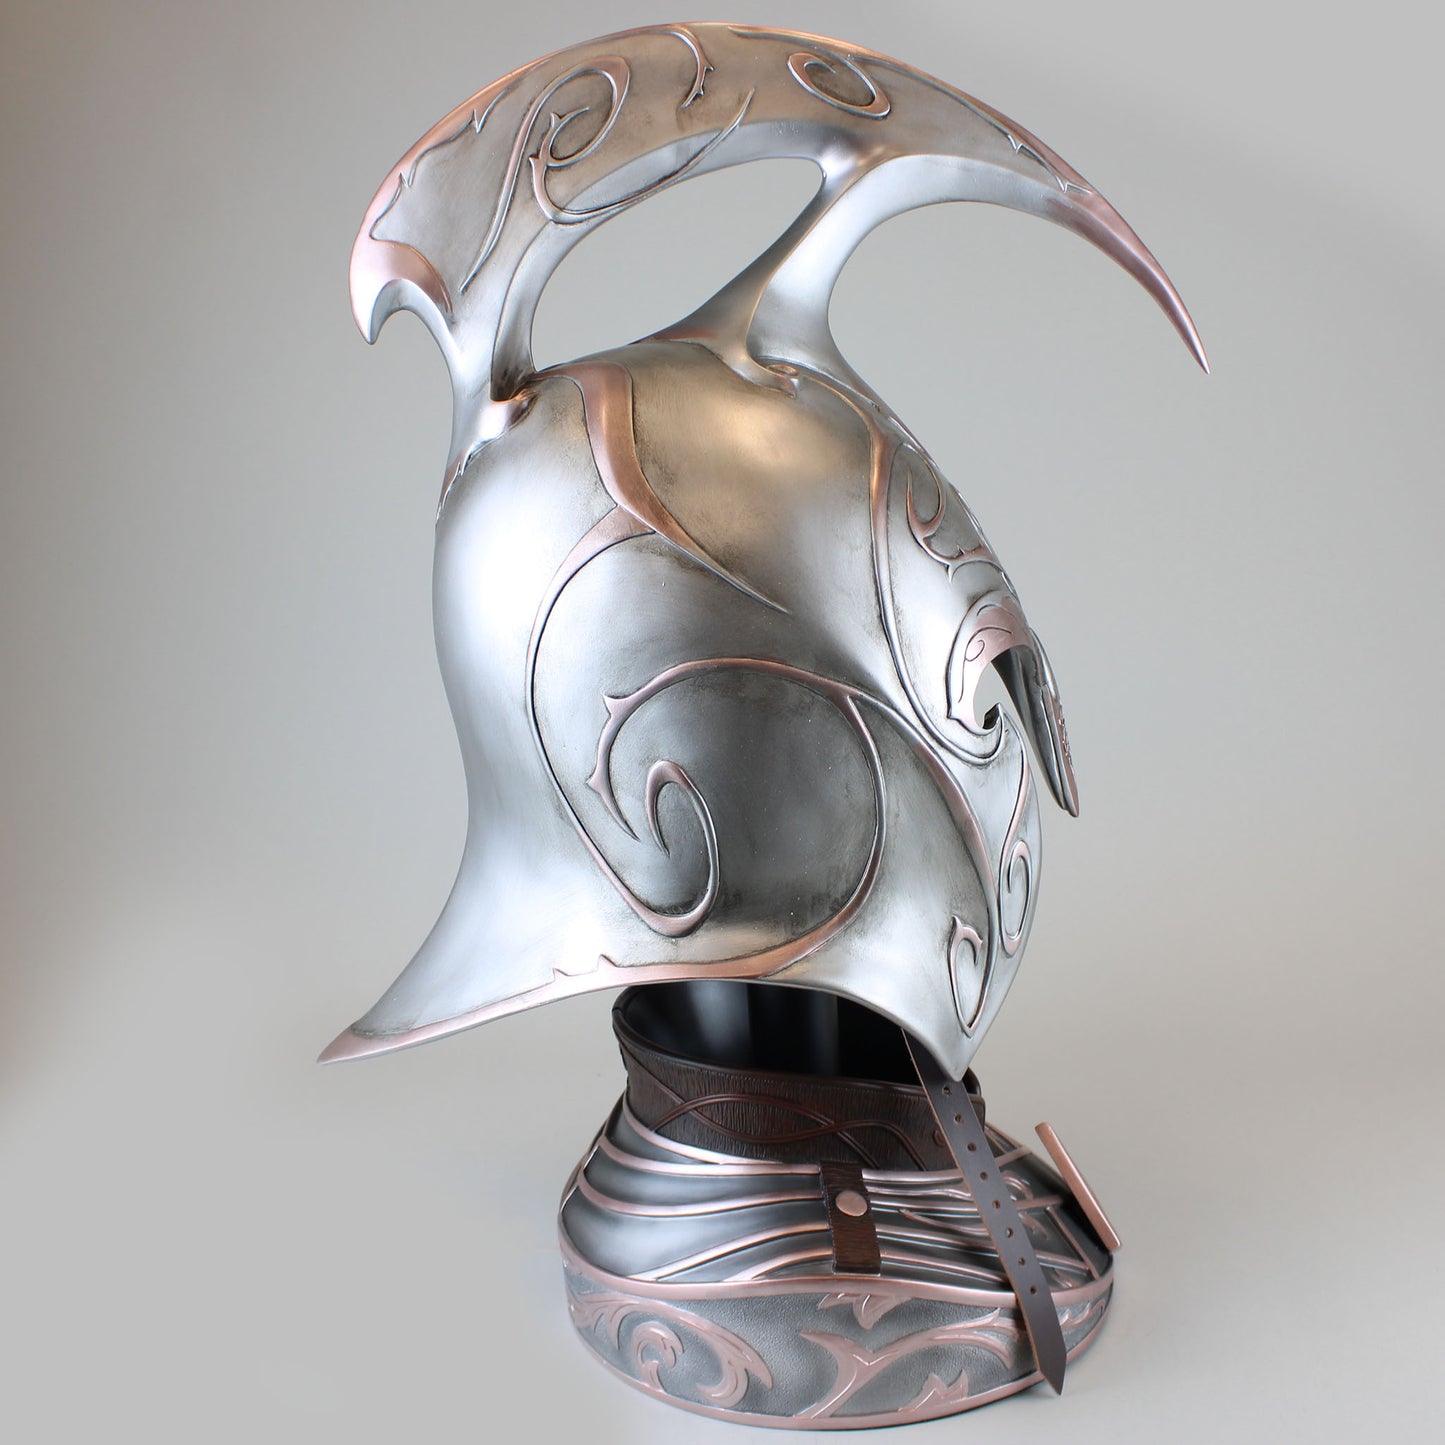 Rivendell Elf Helm (Lord of the Rings) Prop Replica